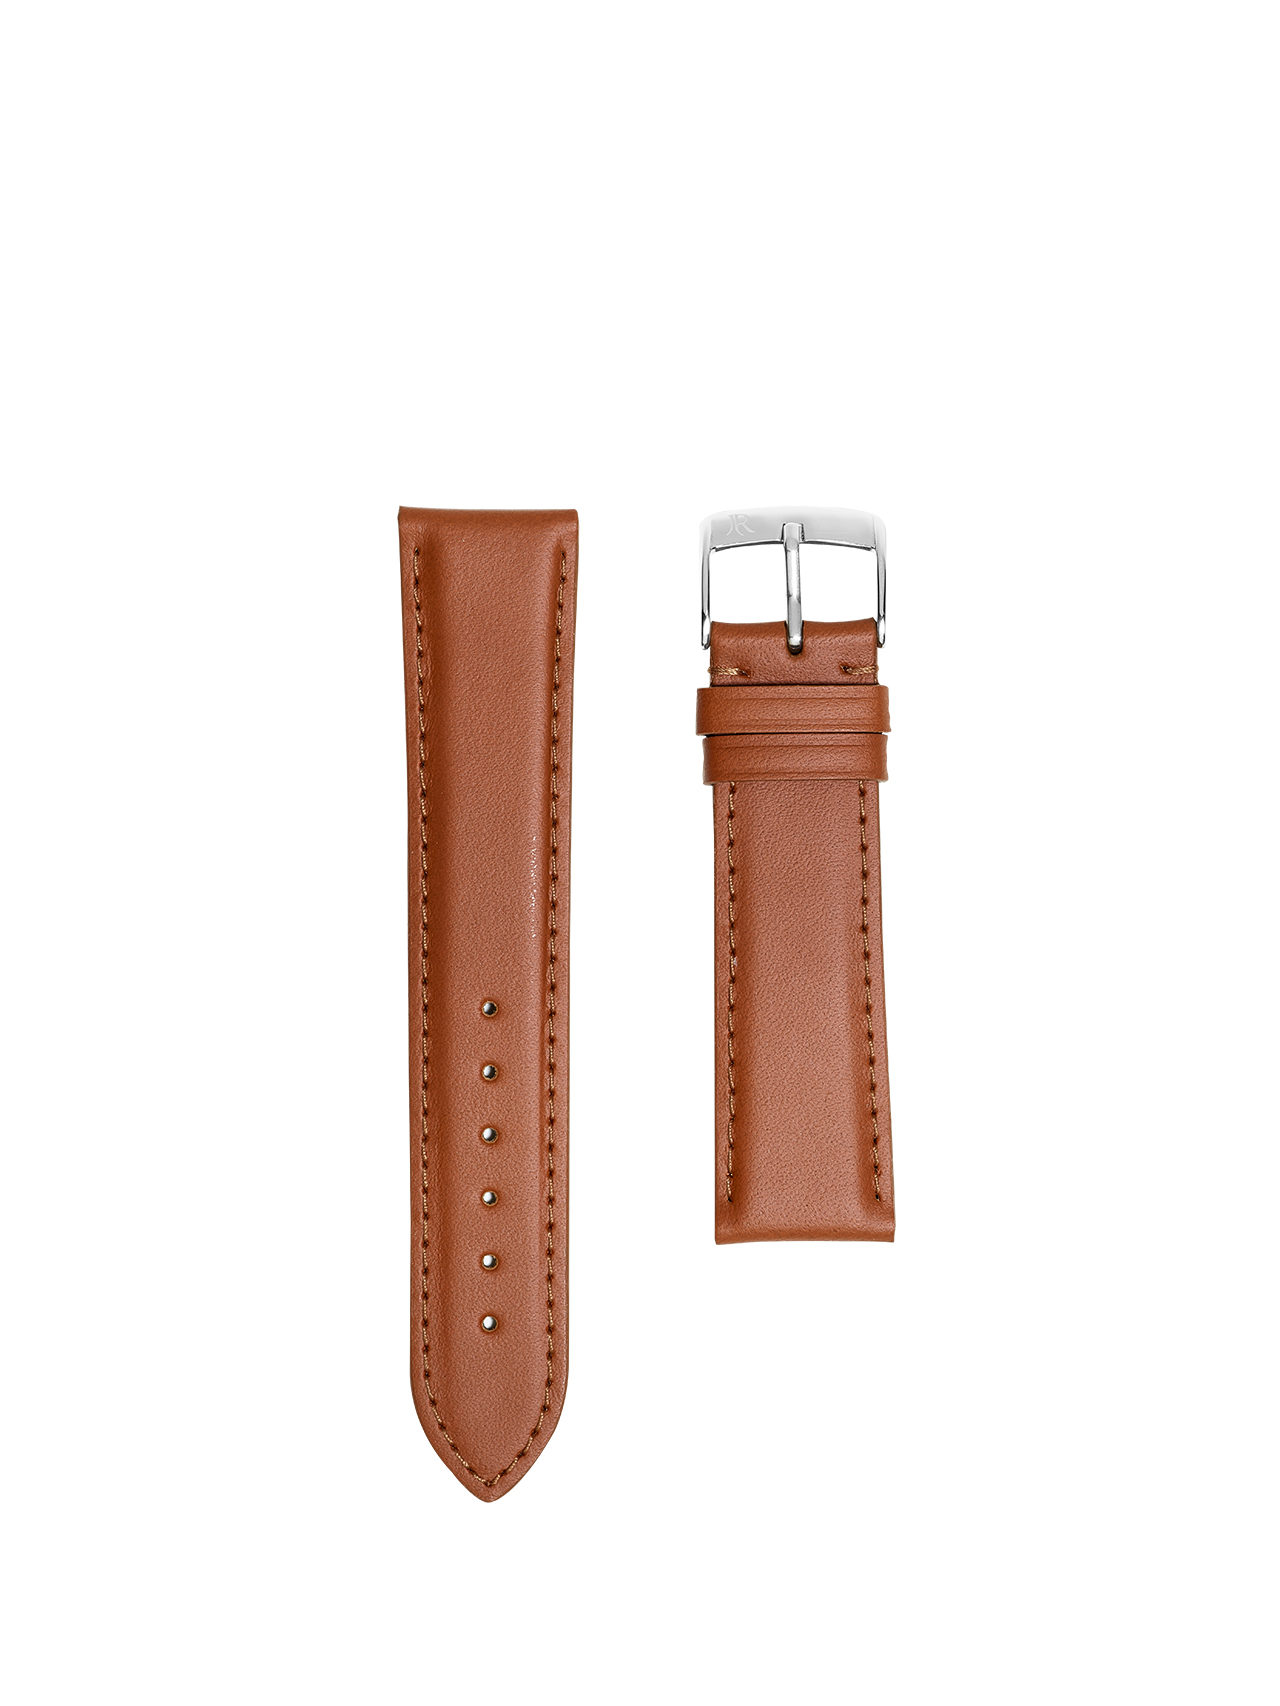 jean rousseau watch straps leather brown